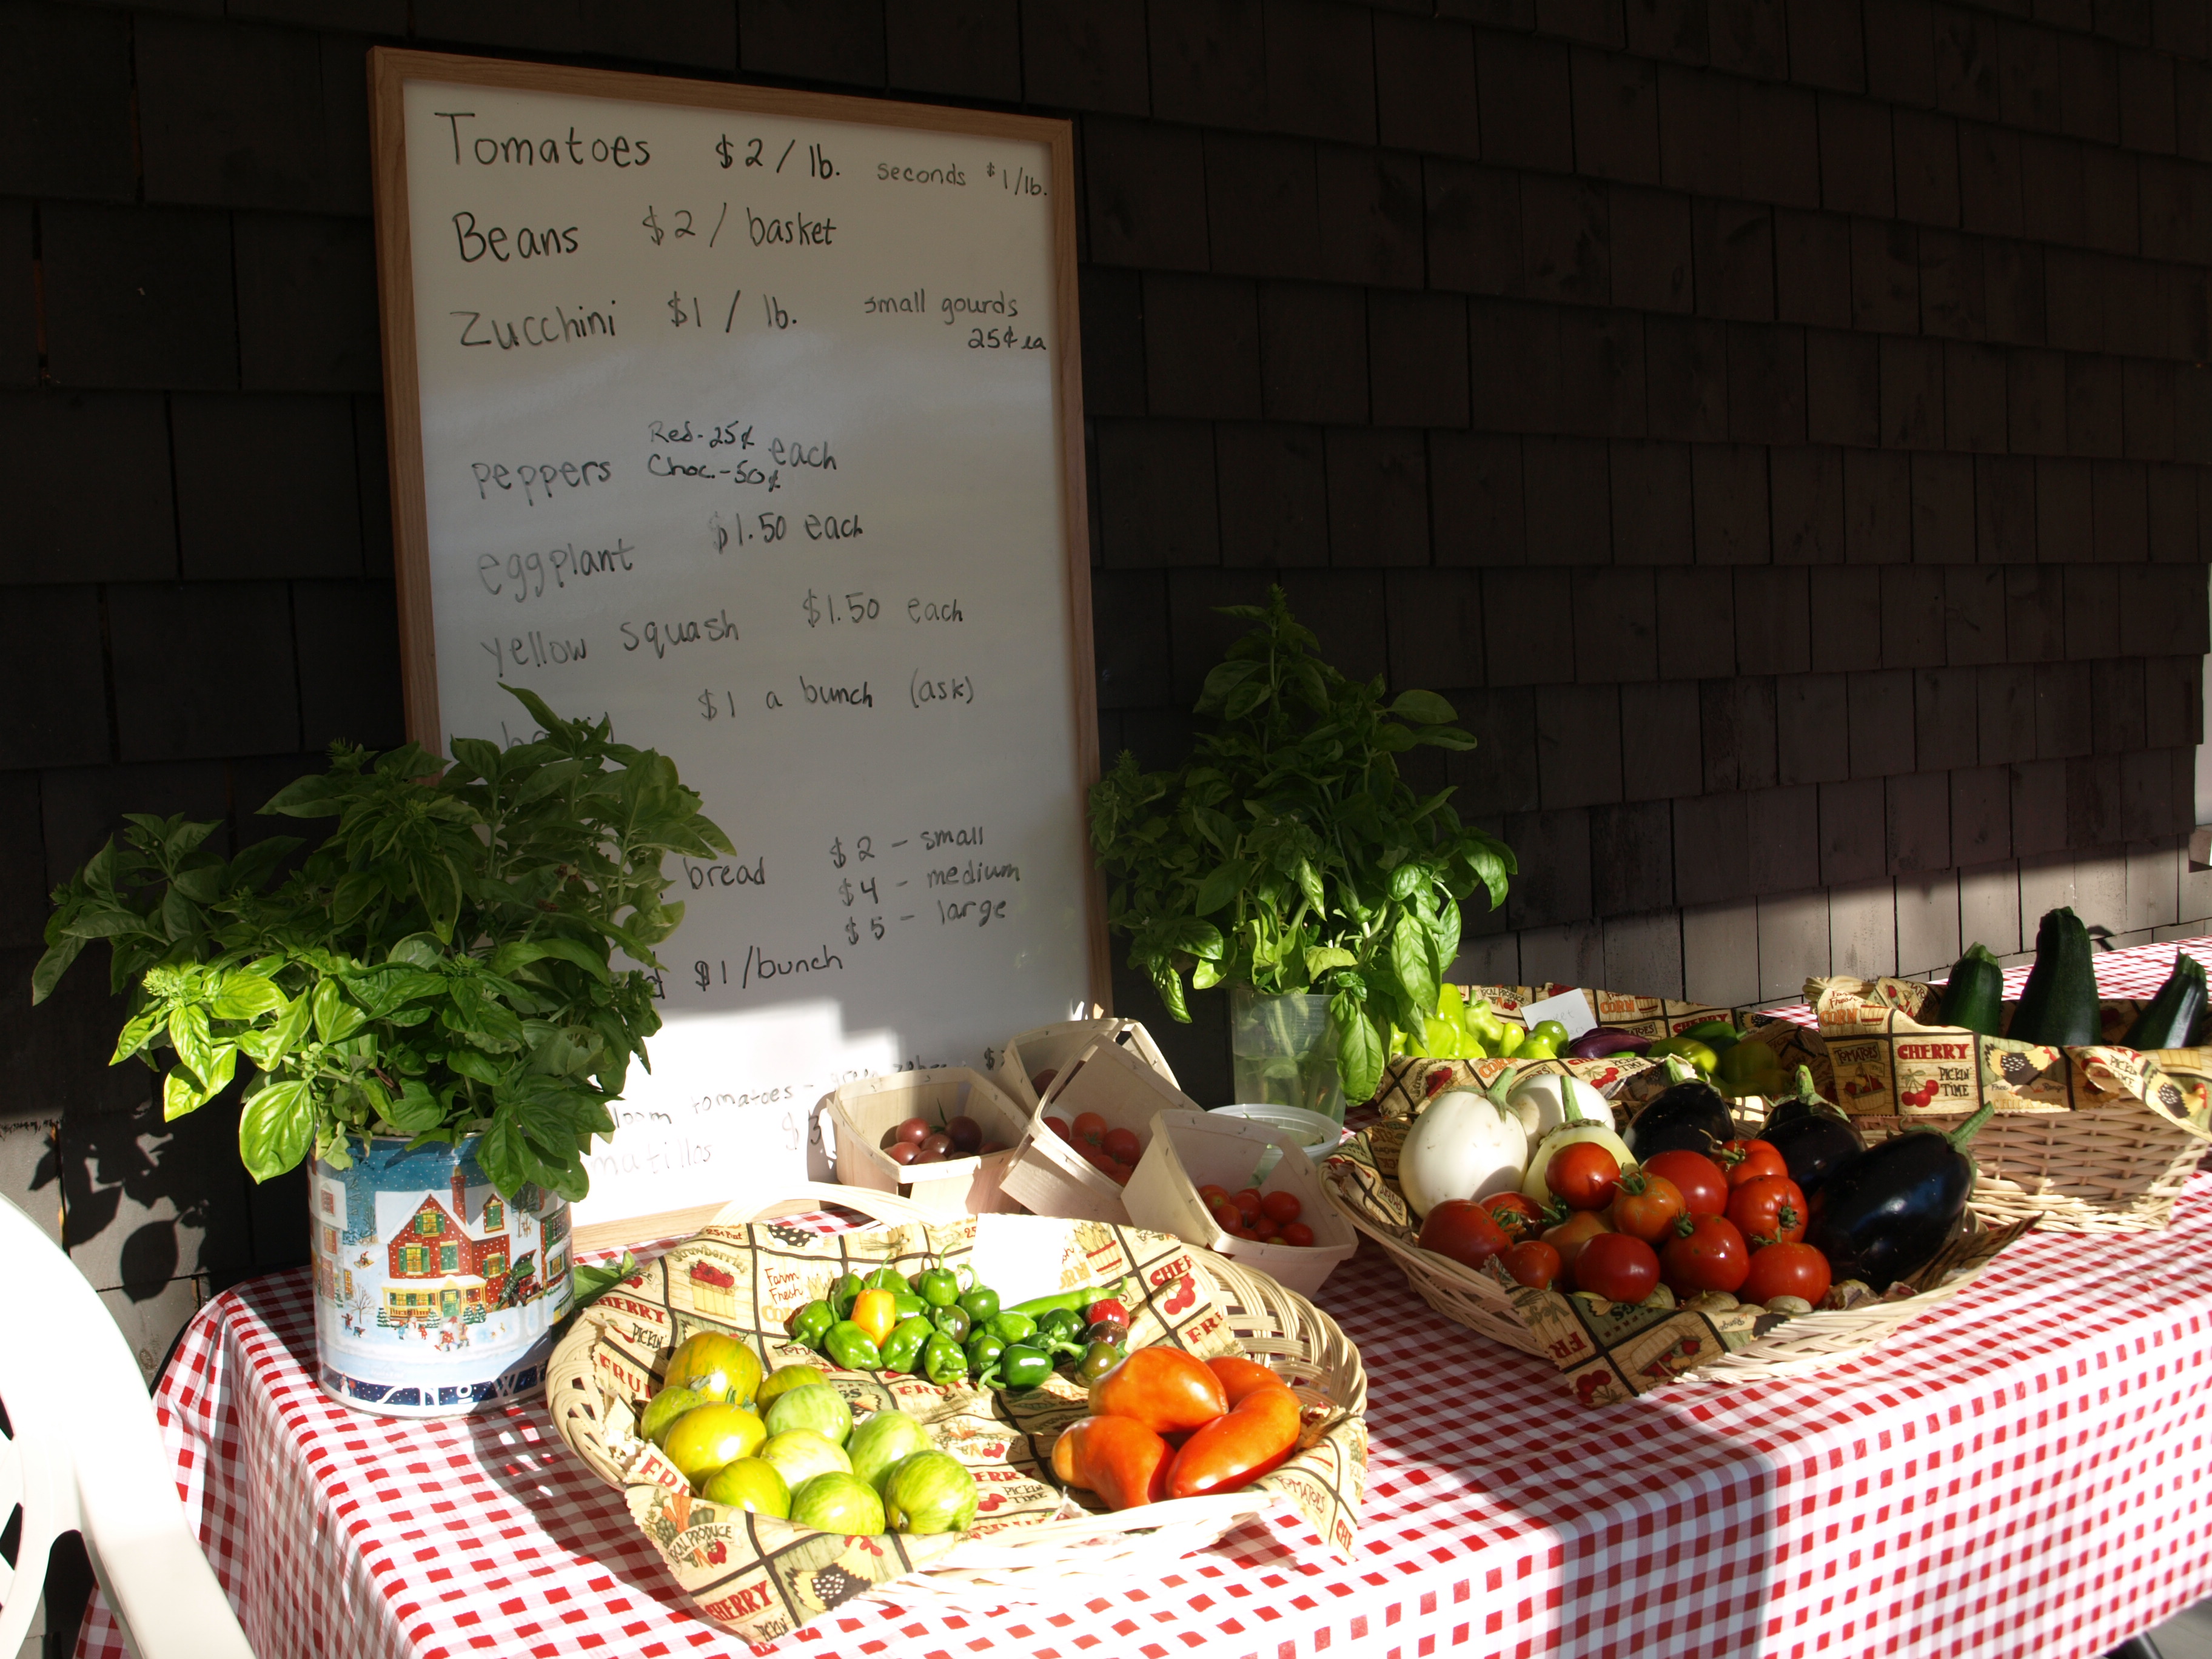 Display of food at the farm stand